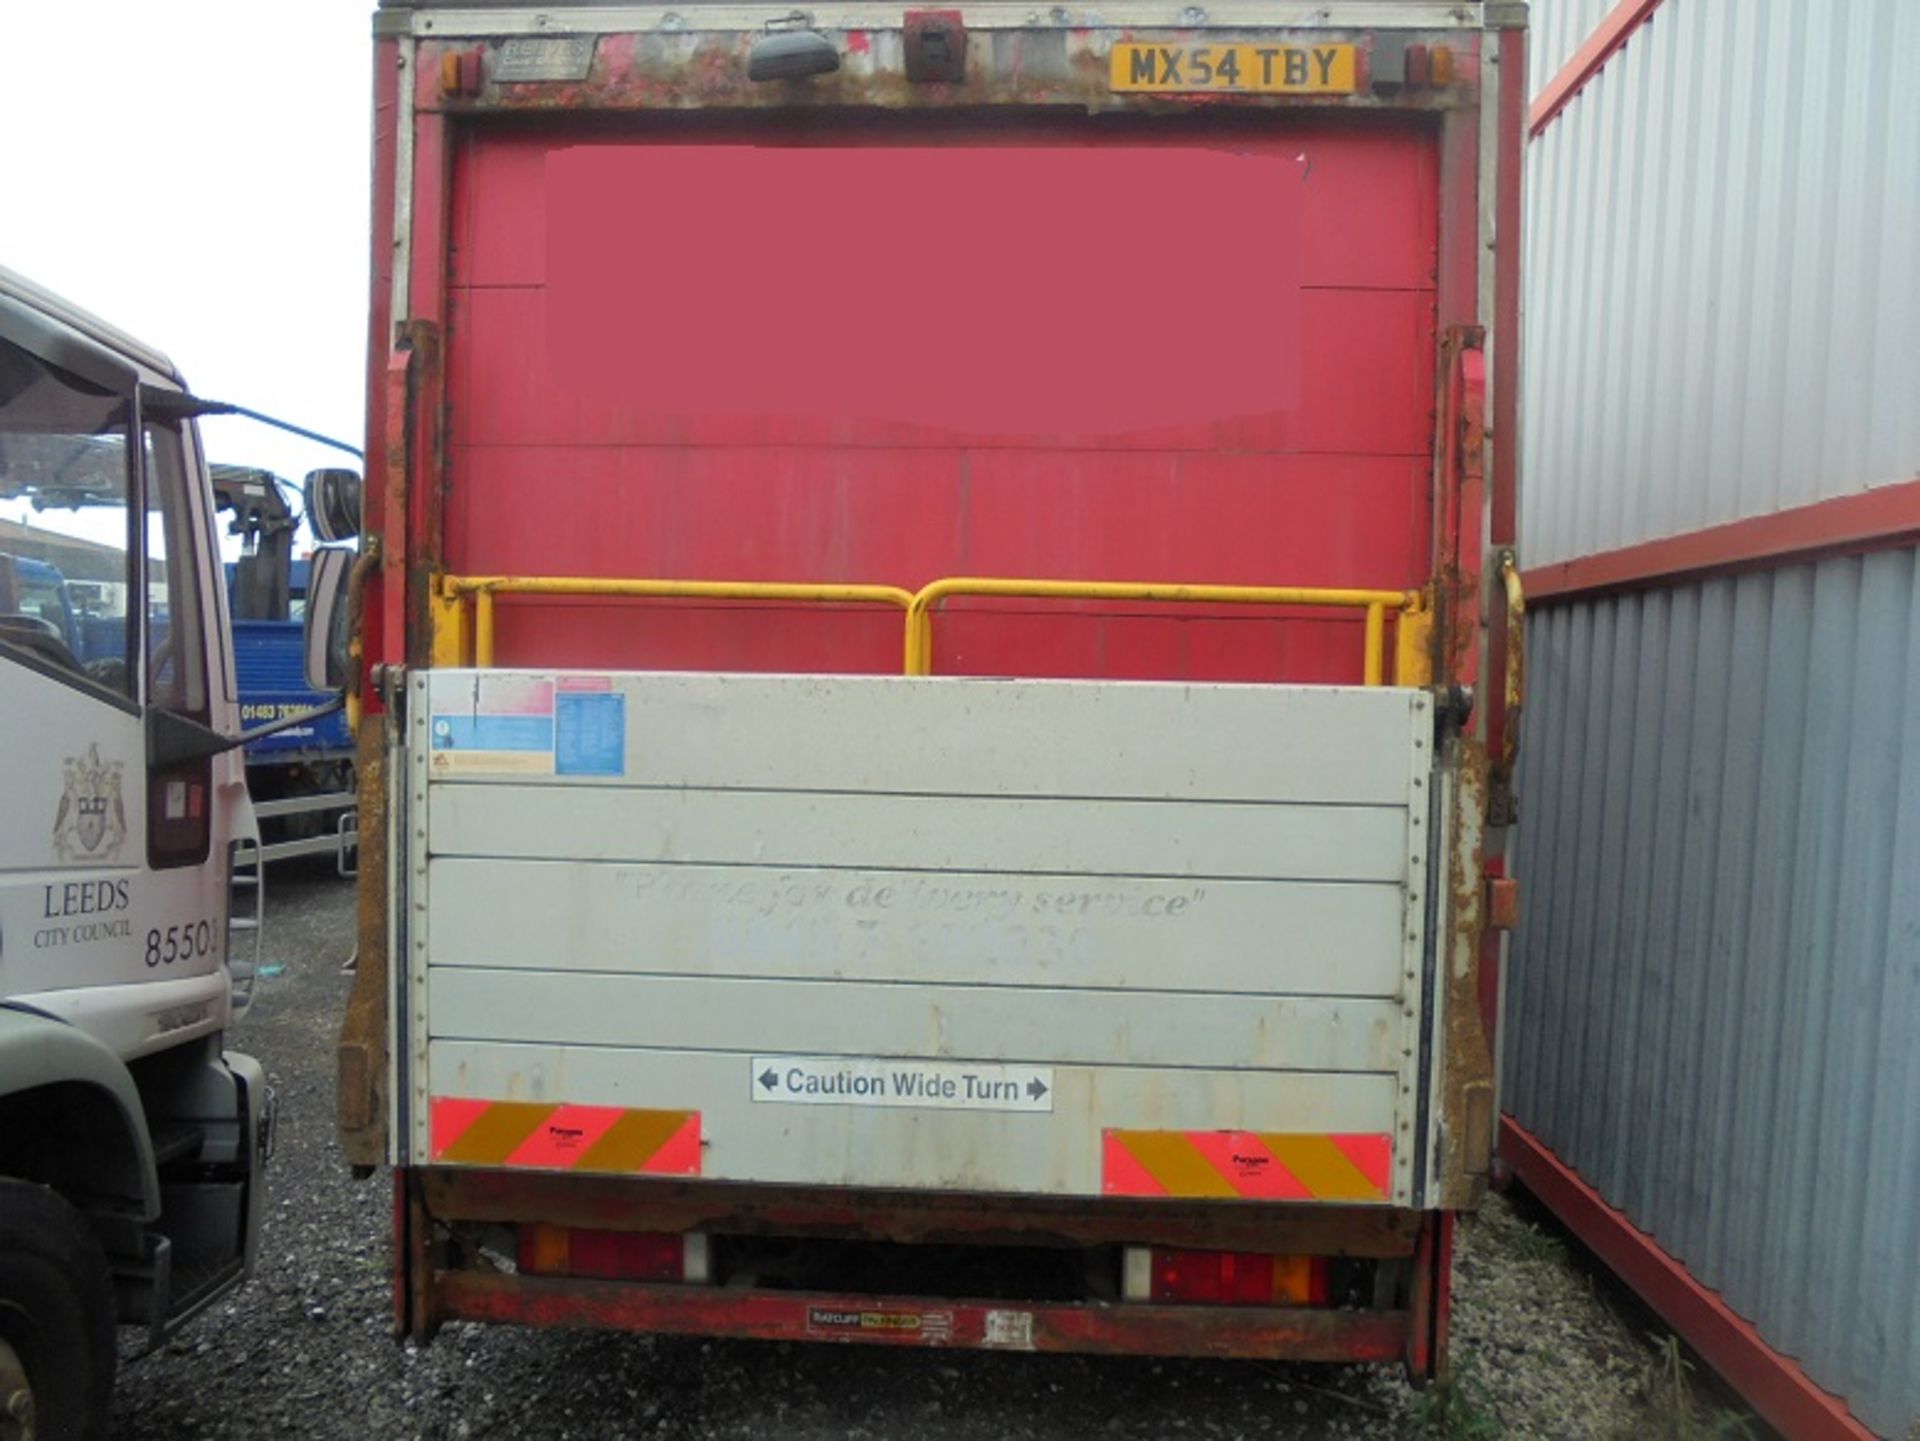 Iveco Stralis 310 6x2 Curtainsider c/w Ratcliffe Column Tail Lift, Registration No. MX54 TBY, First - Image 4 of 7